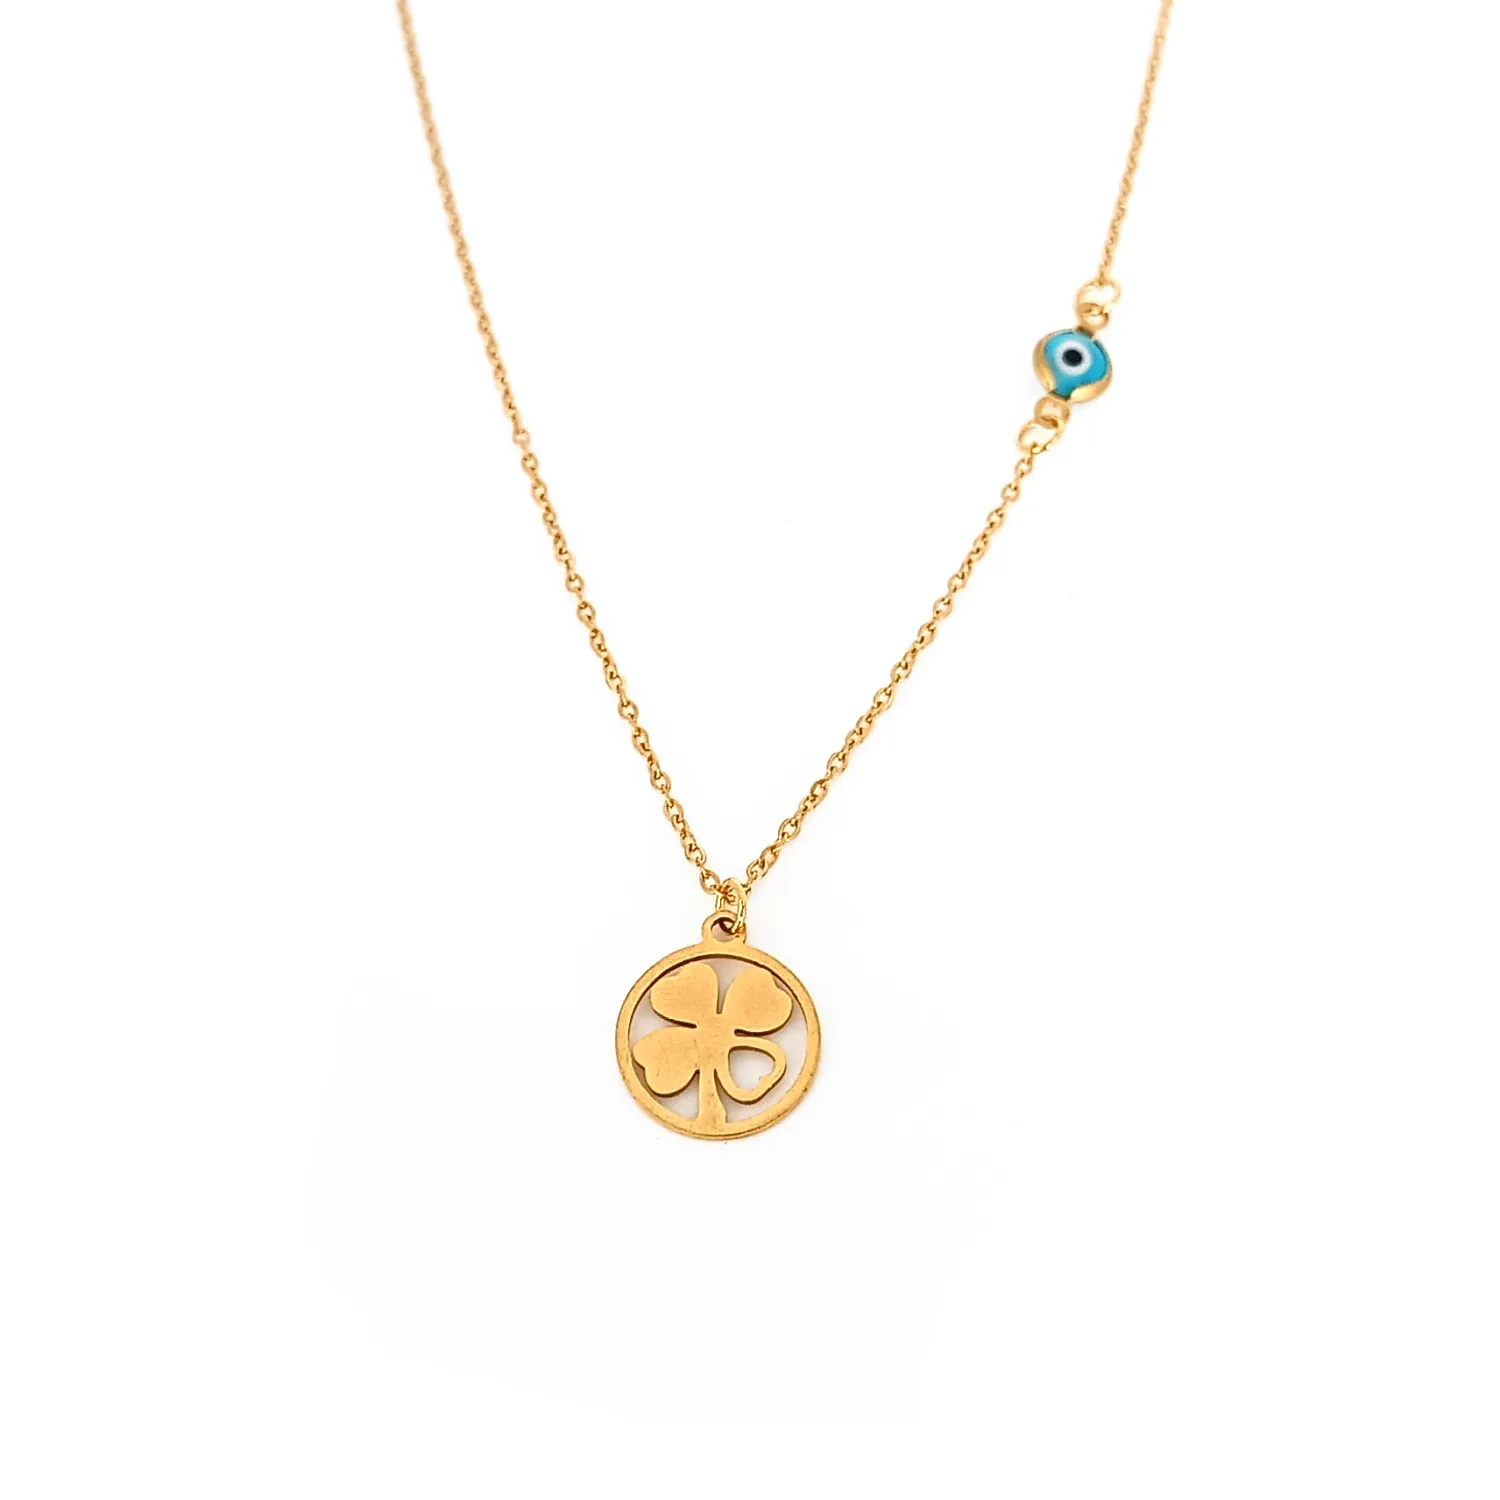 Clover necklace with evil eye